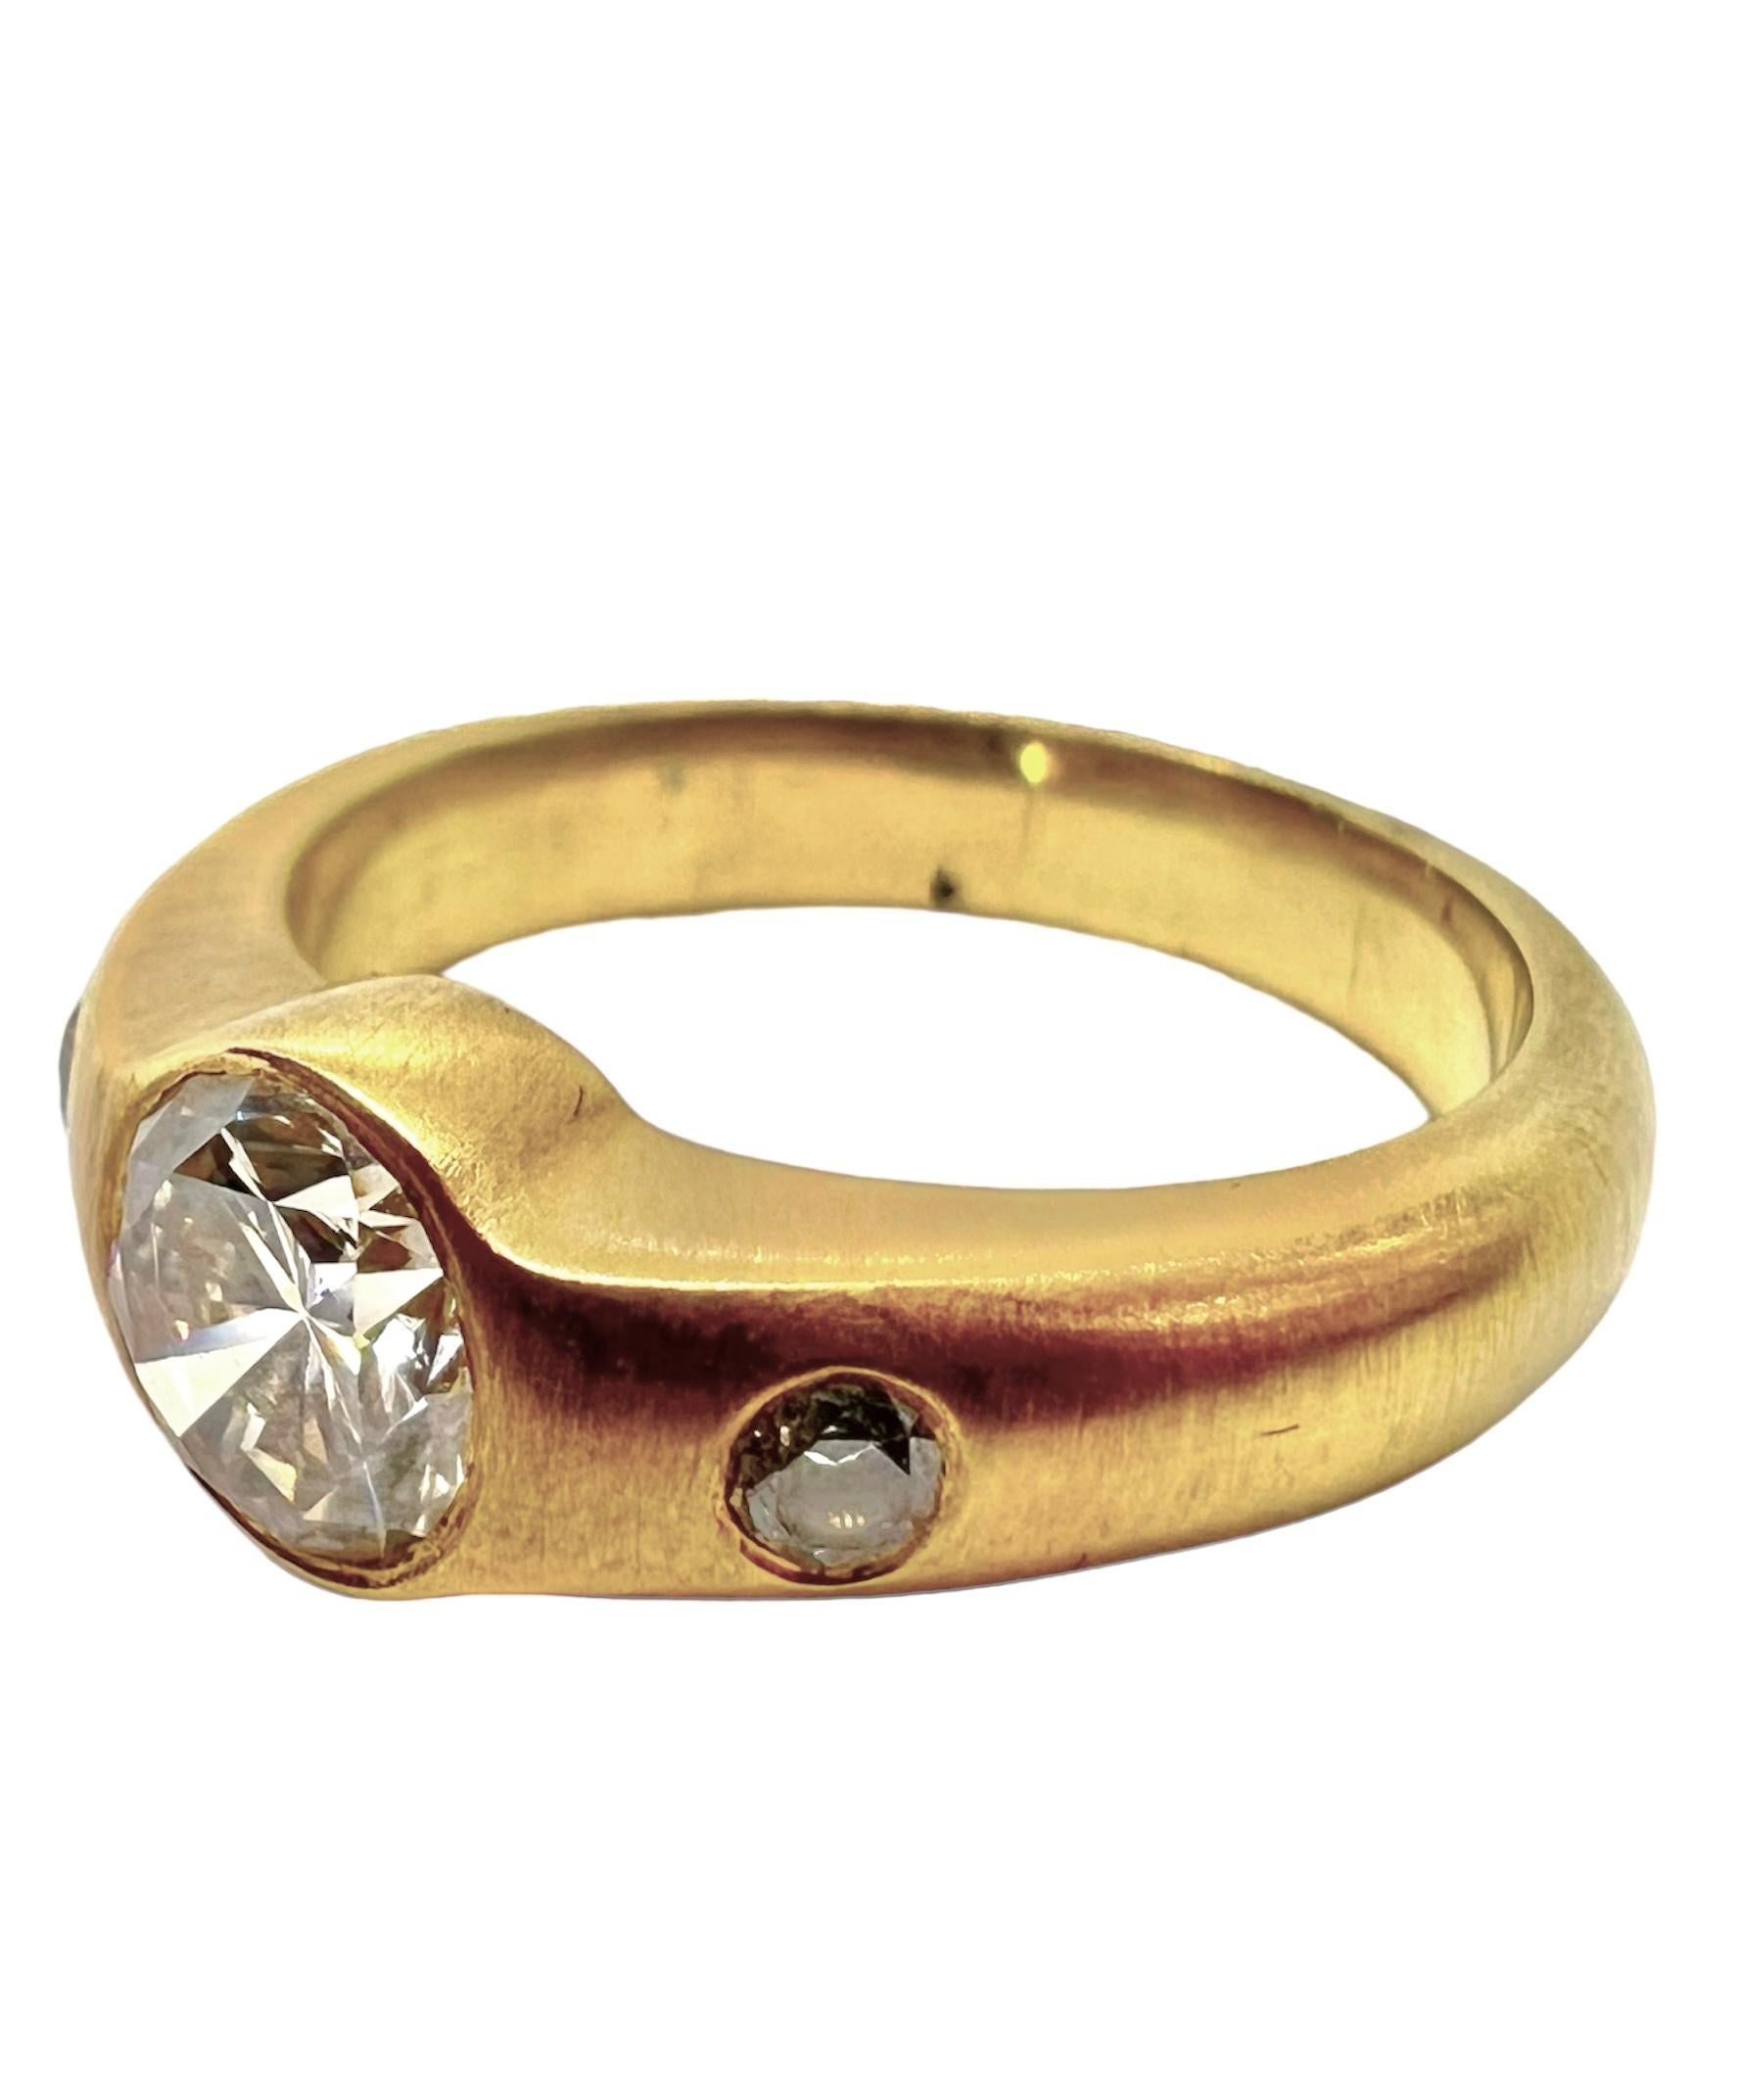 18K yellow gold ring with 3 round diamonds.

Sophia D by Joseph Dardashti LTD has been known worldwide for 35 years and are inspired by classic Art Deco design that merges with modern manufacturing techniques.